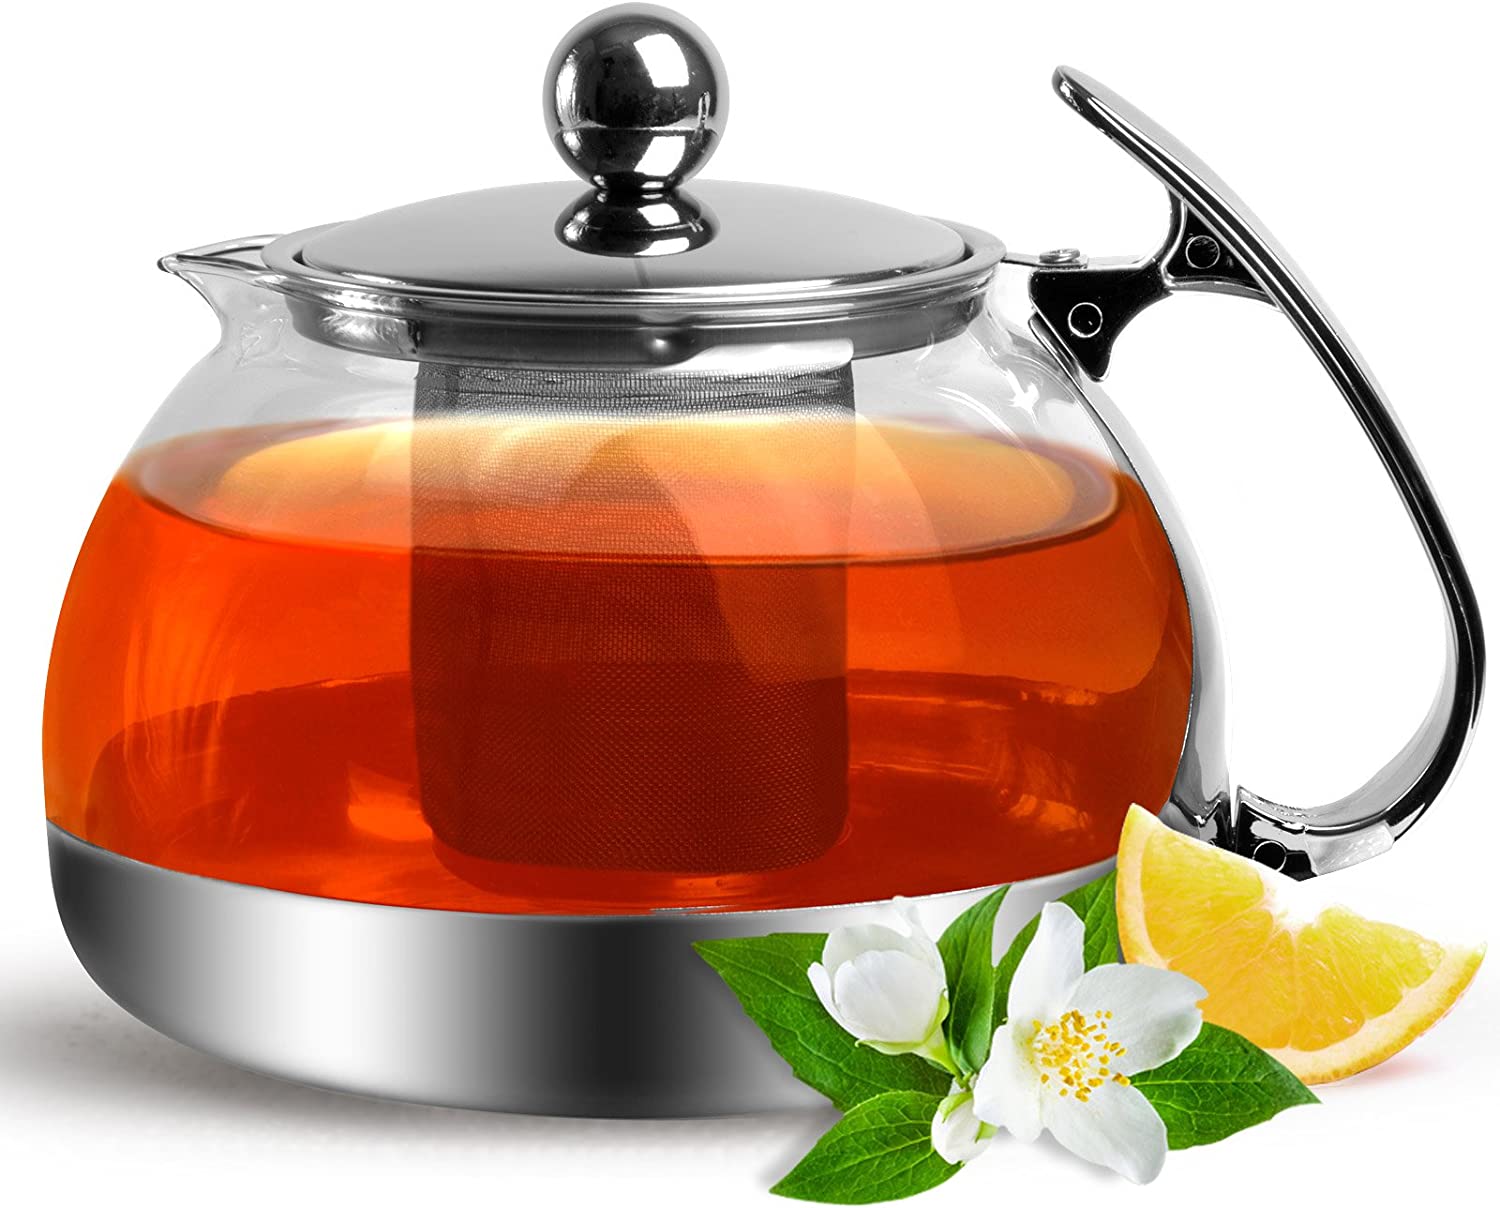 Deuba Glass Teapot with Strainer Insert Removable Stainless Steel 1200 ml Drip Free Heat Resistant Household Glass Jug Tea Strainer